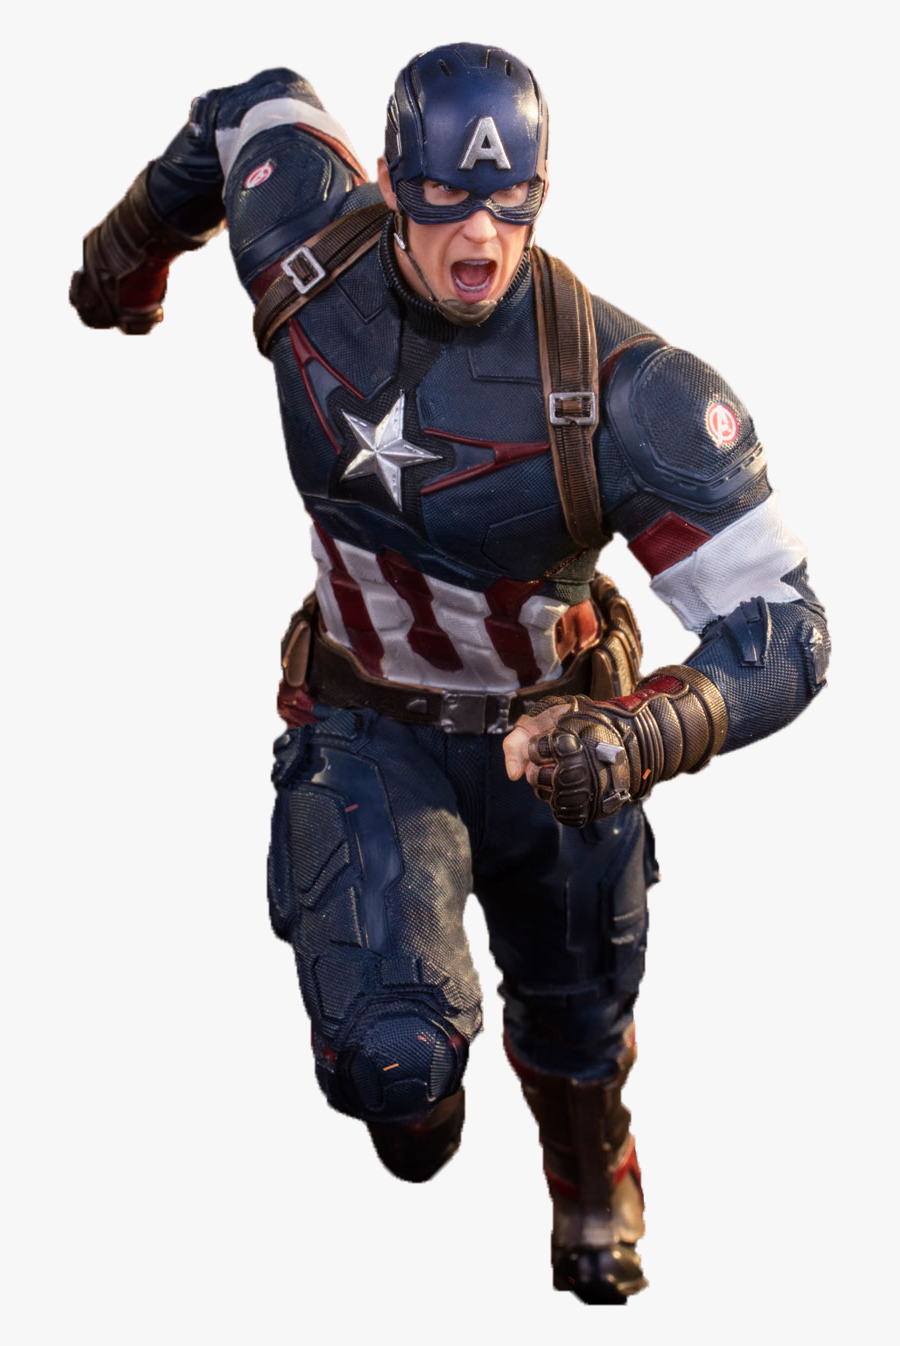 Free Download Of Captain America Png Image Without - Captain America Png, Transparent Clipart